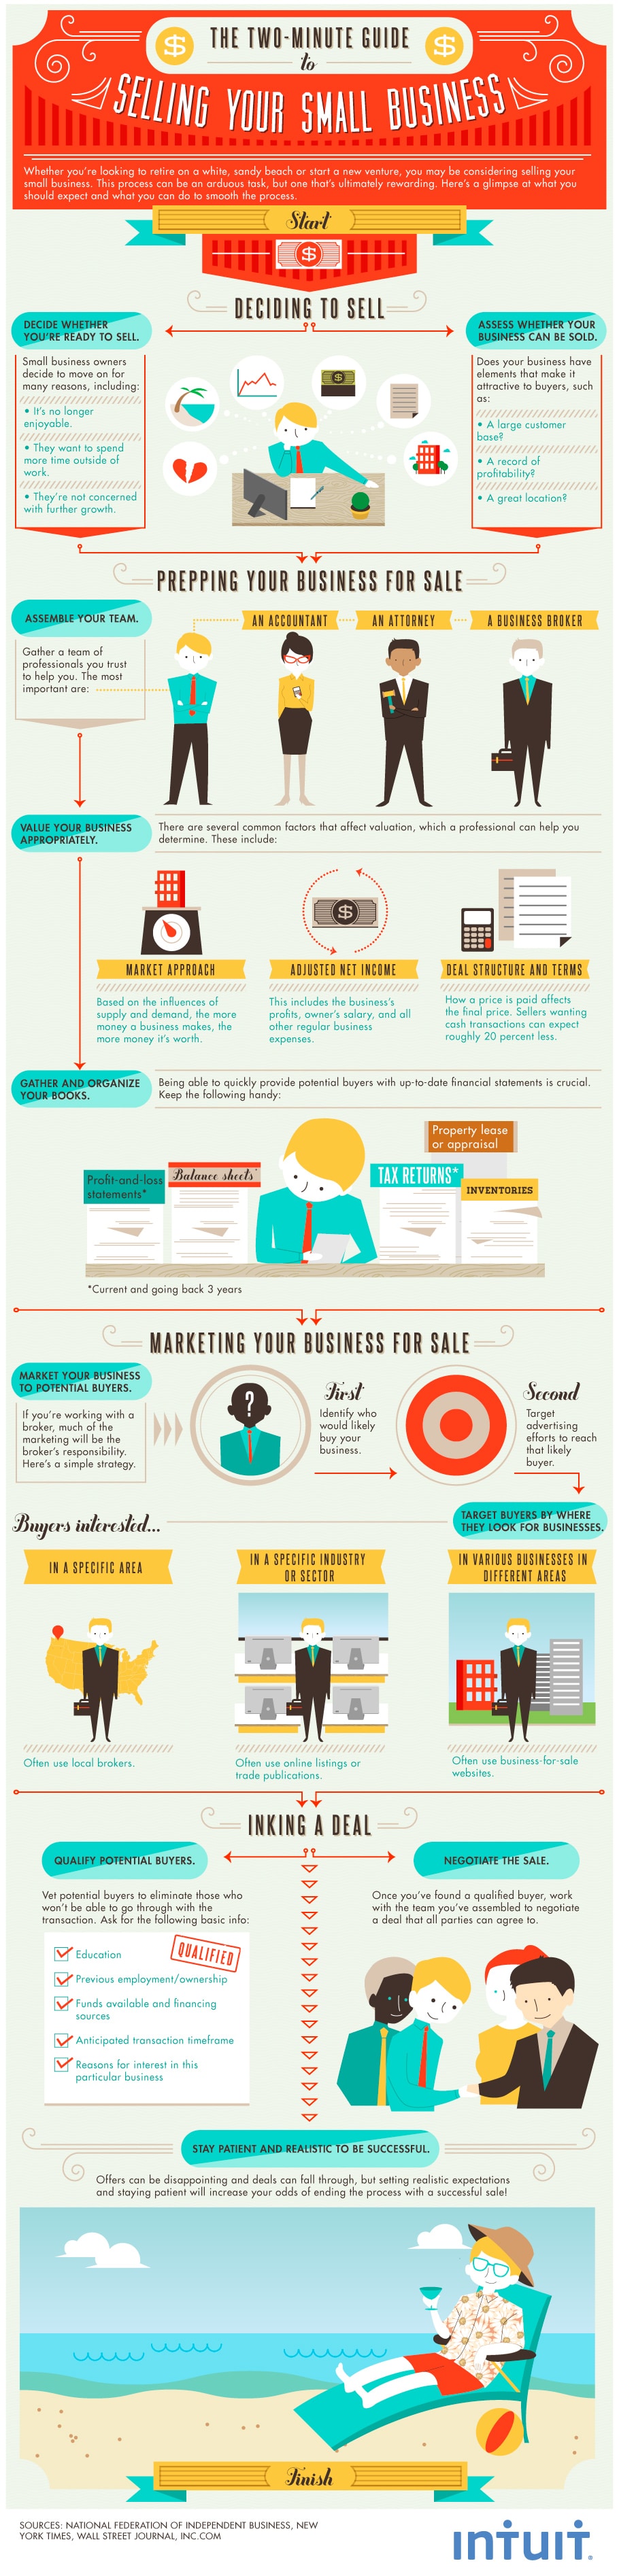 Simple Guide To Selling Your Small Business [Infographic]